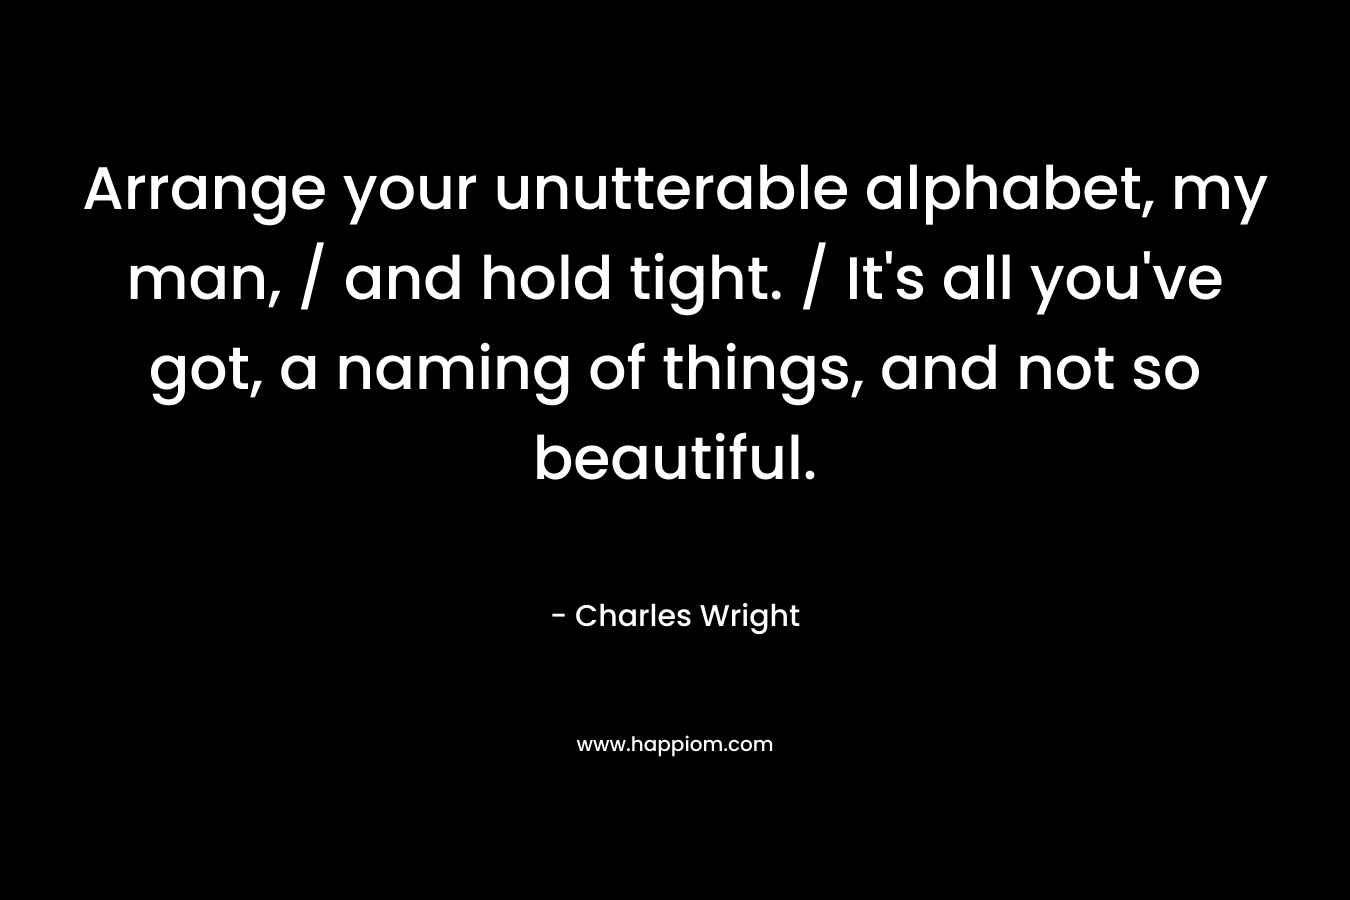 Arrange your unutterable alphabet, my man, / and hold tight. / It’s all you’ve got, a naming of things, and not so beautiful. – Charles Wright